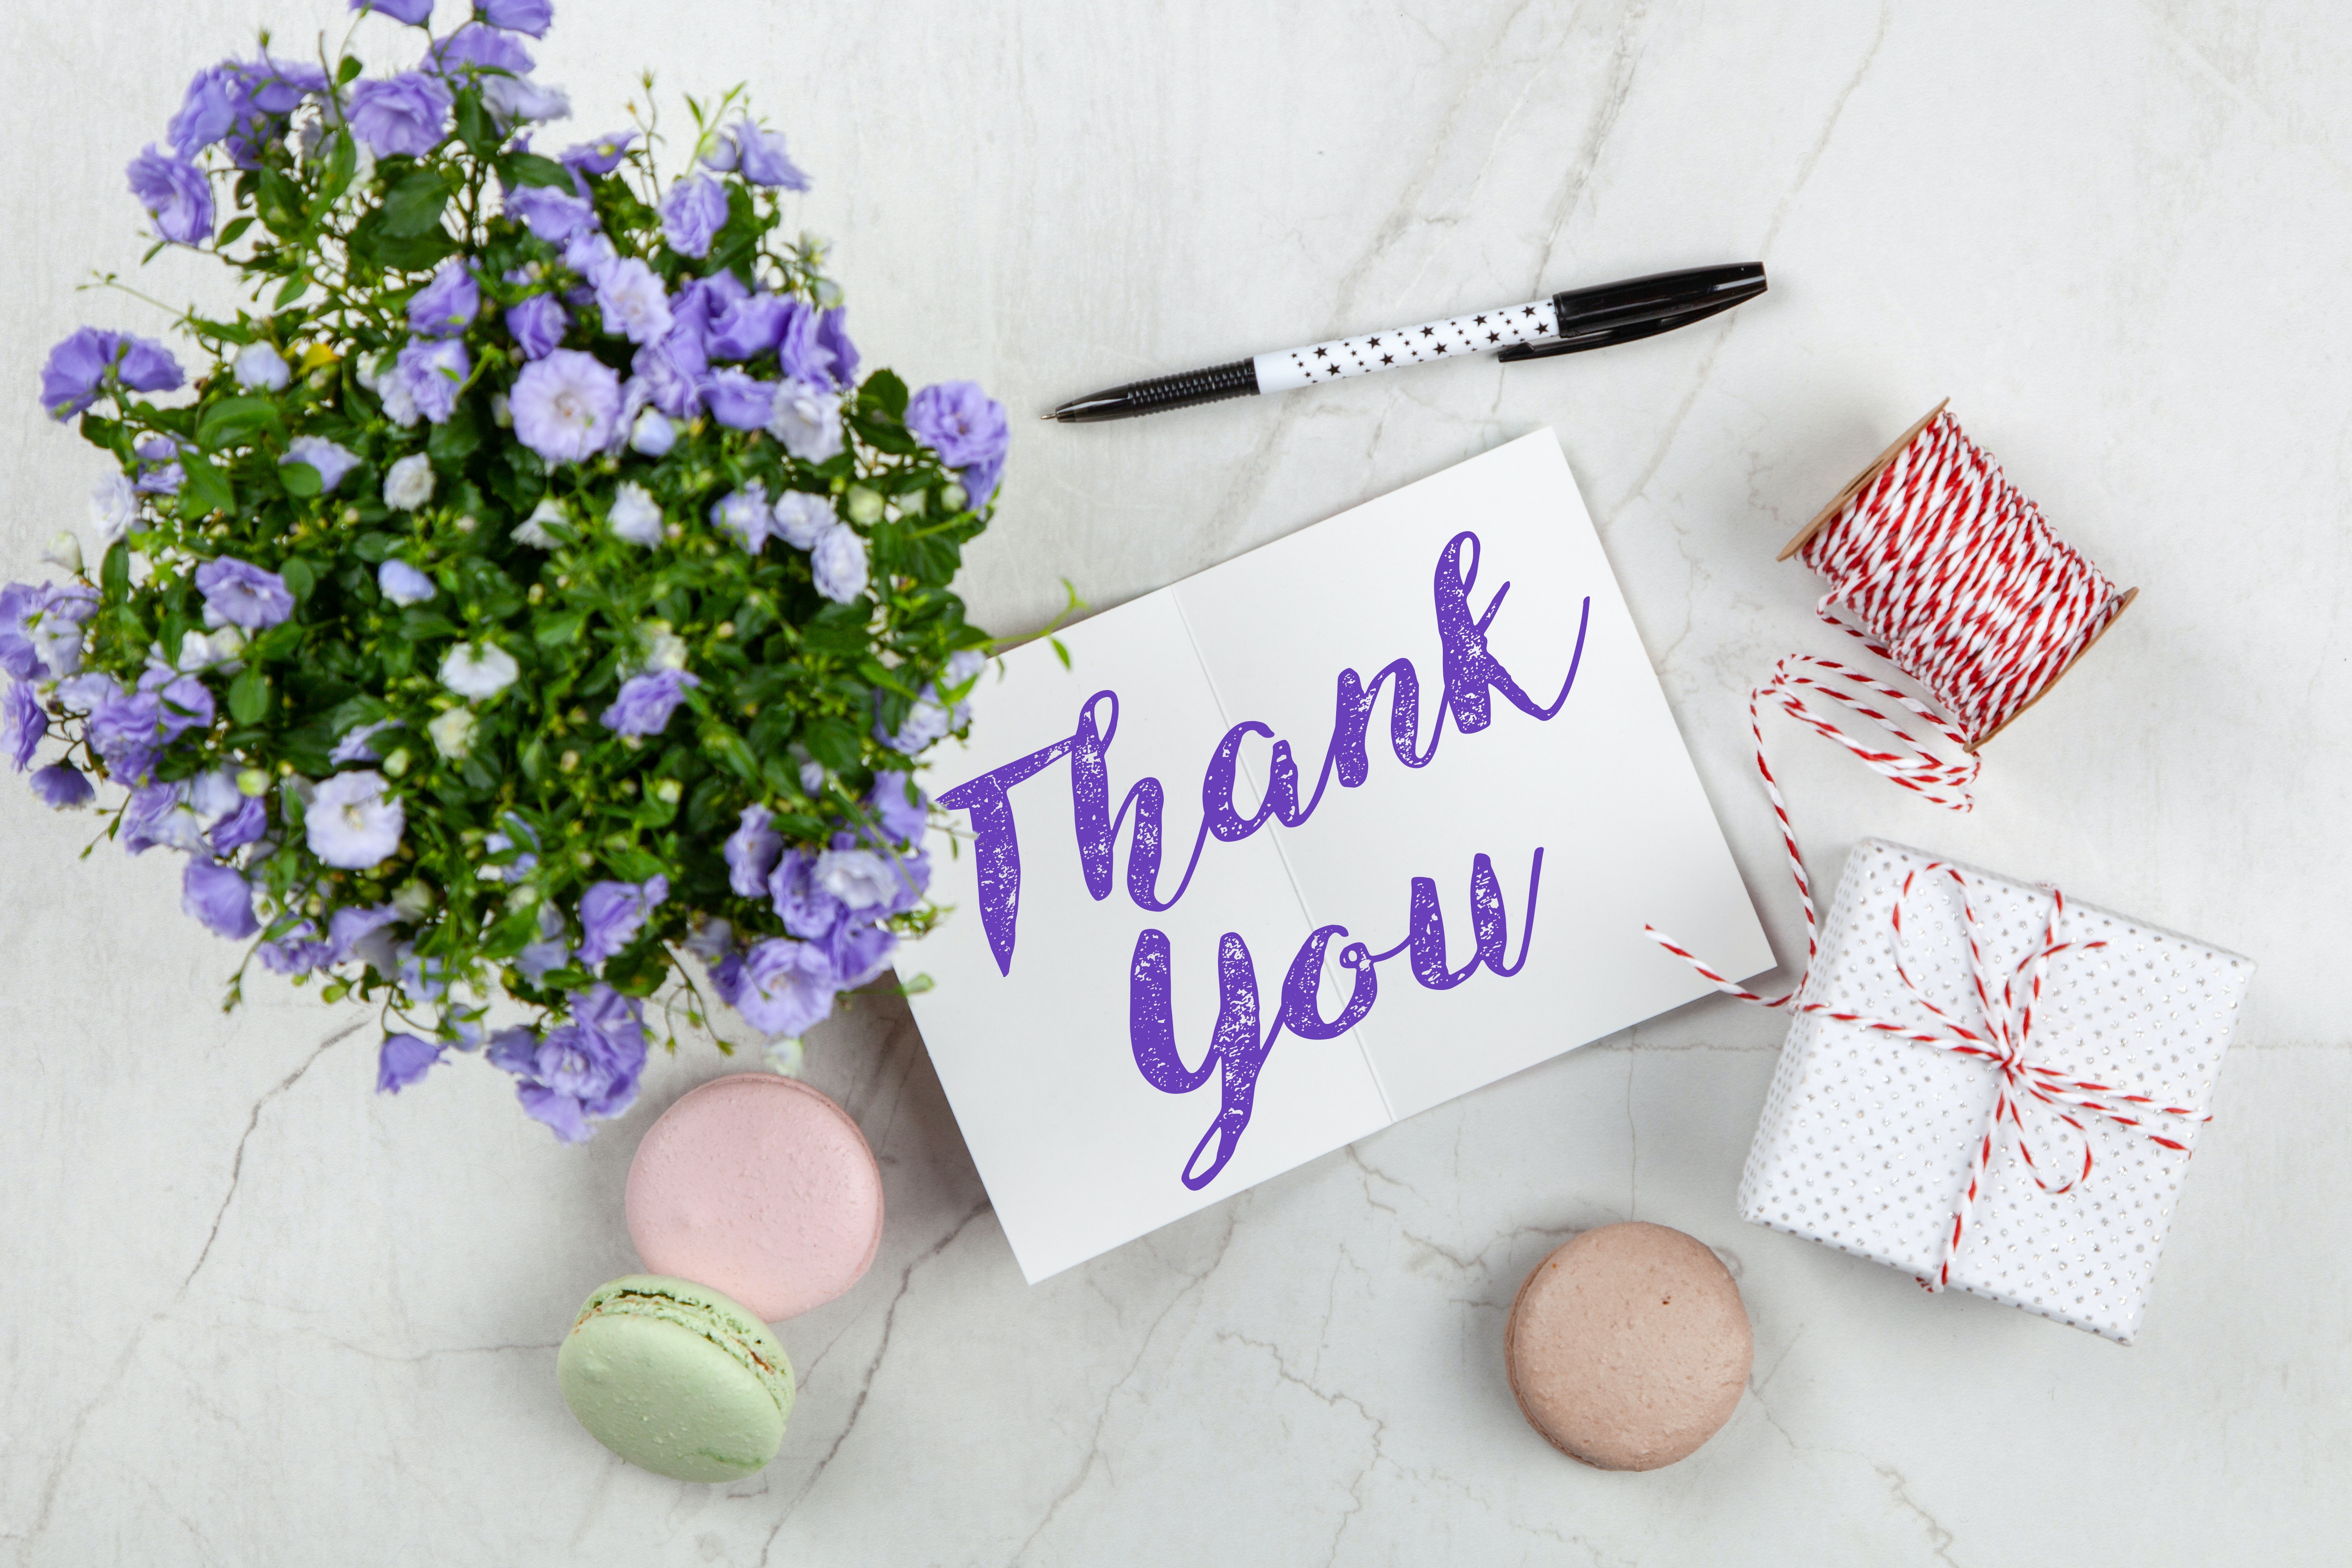 sample thank you notes for birthday gifts